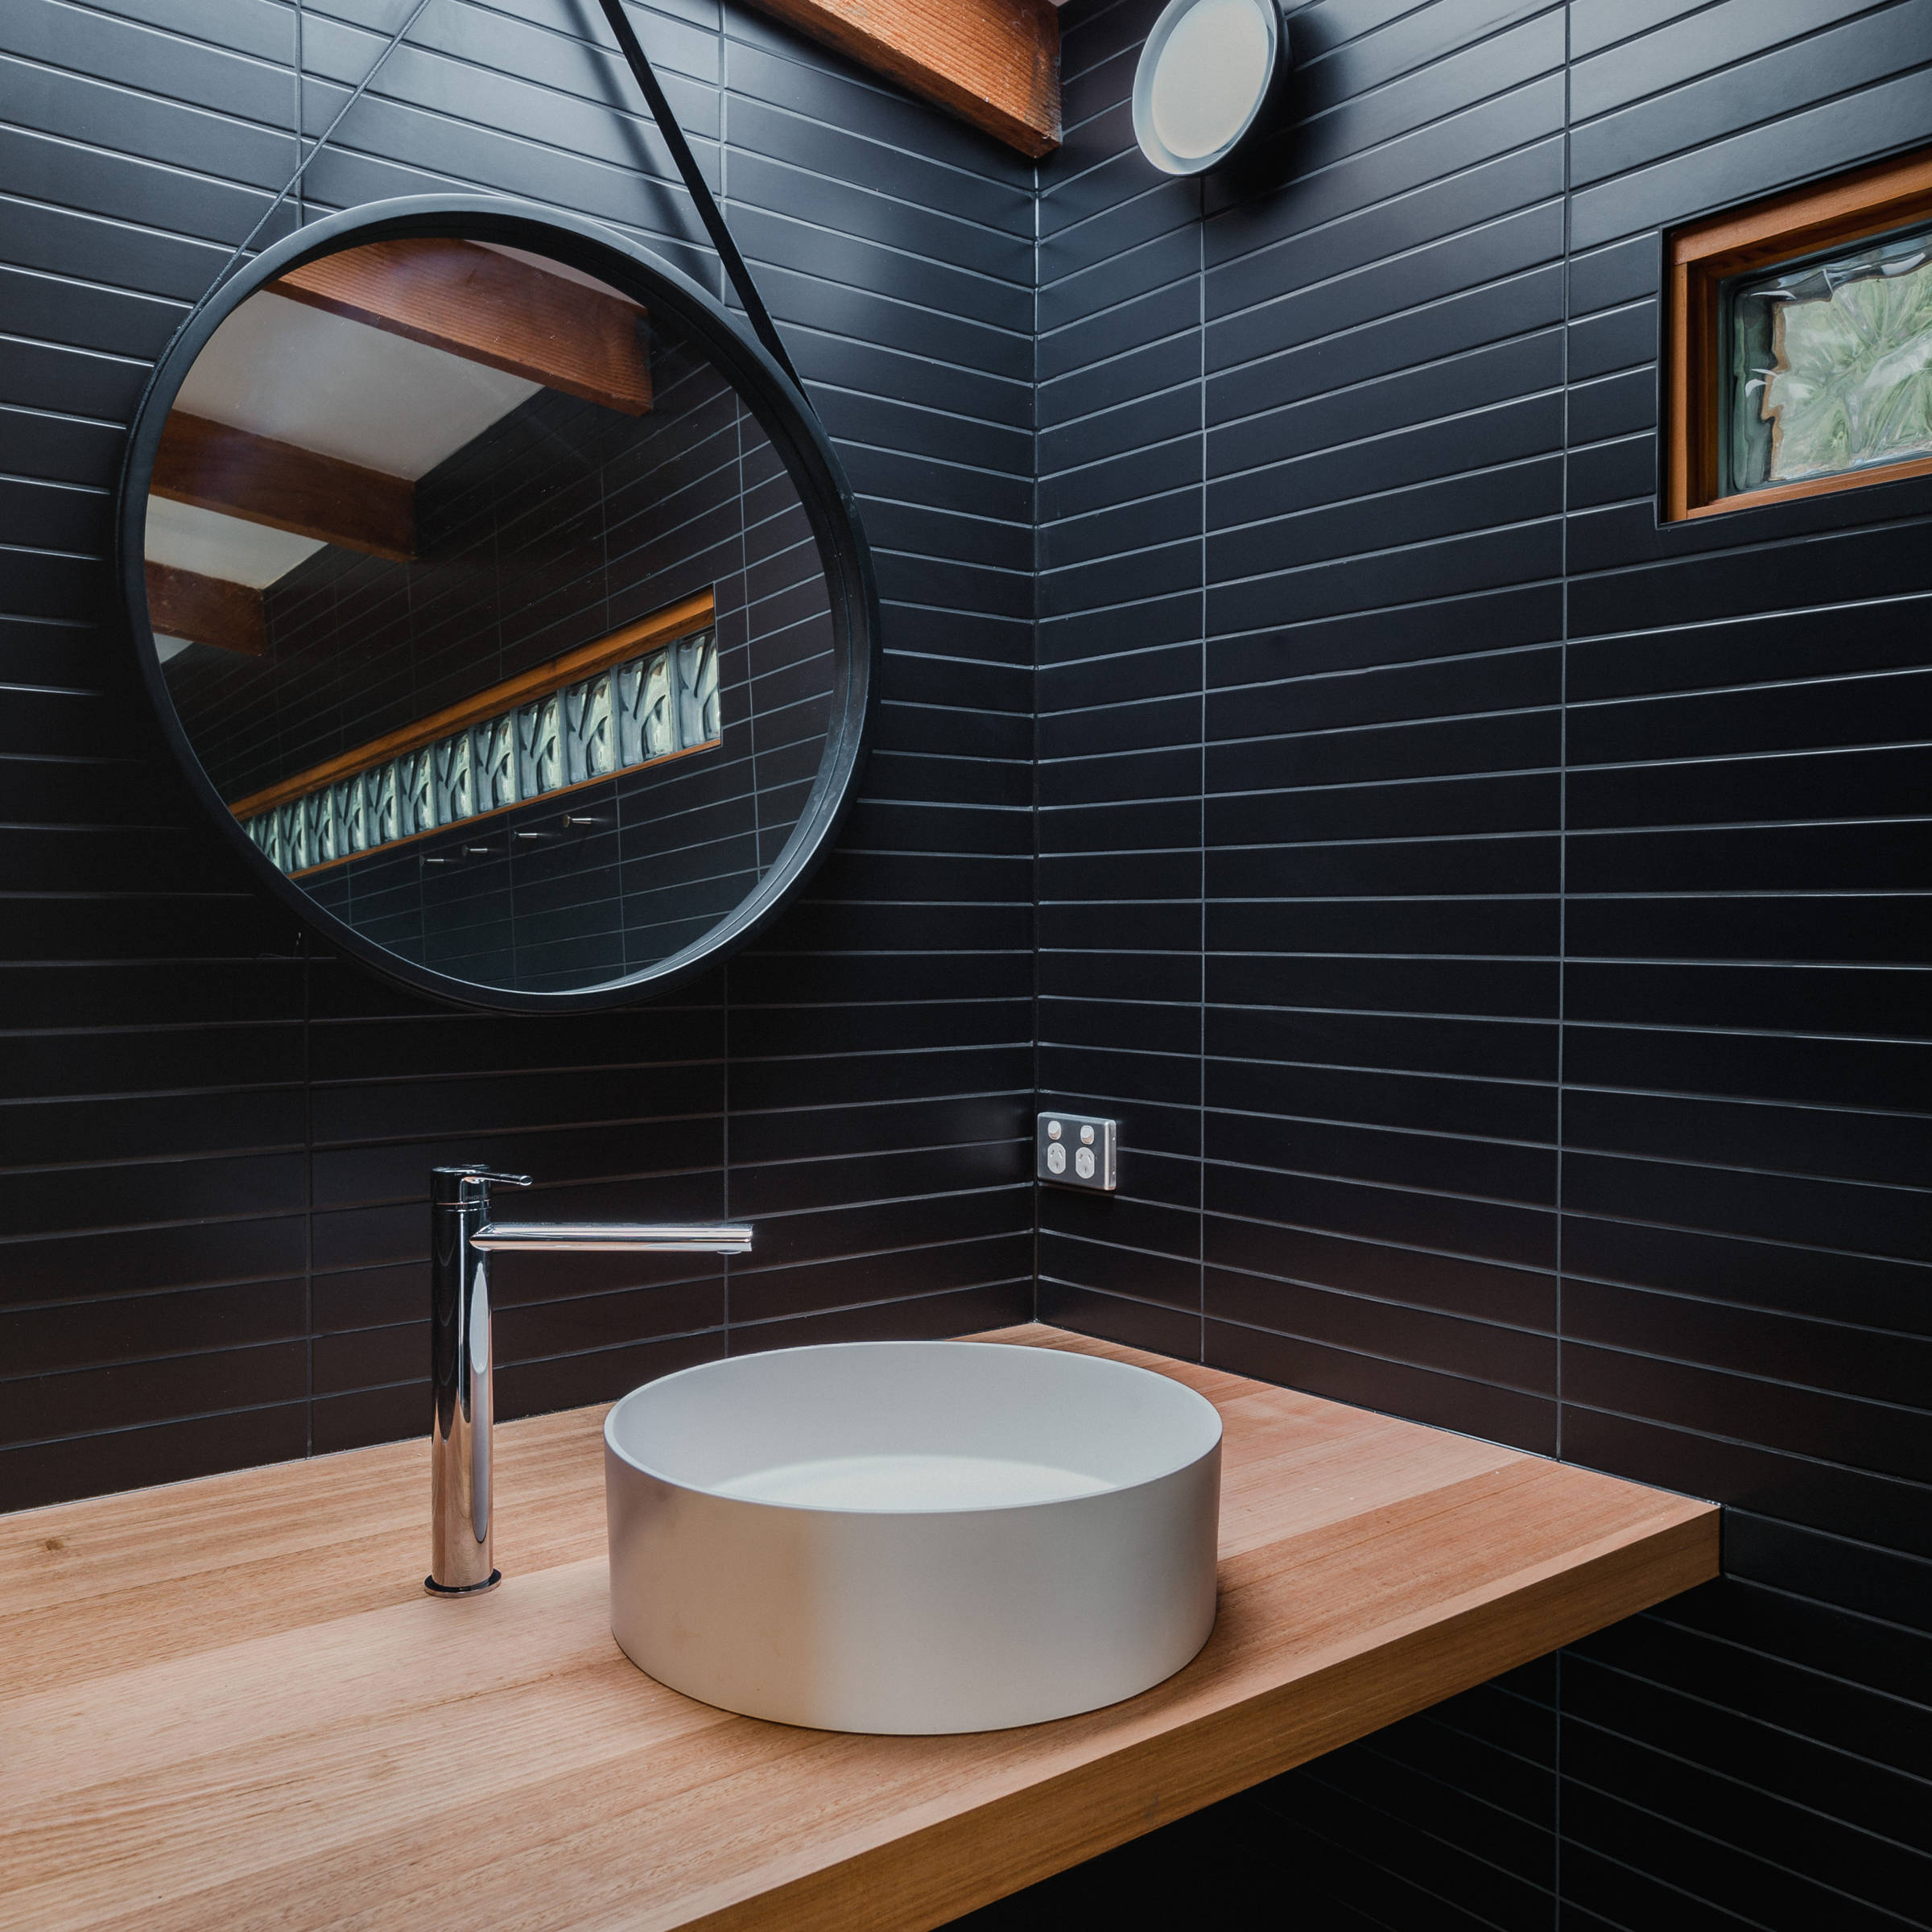 Custom Japanese inspired bathroom renovation featuring black mosaic tiles, hanging mirror, custom timber benchtop in Tasmanian oak. The architectural bathroom renovation was designed to give a contemporary feel and also features a round white basin with increased natural light from a new skylight. Photo: Jordan Davis.